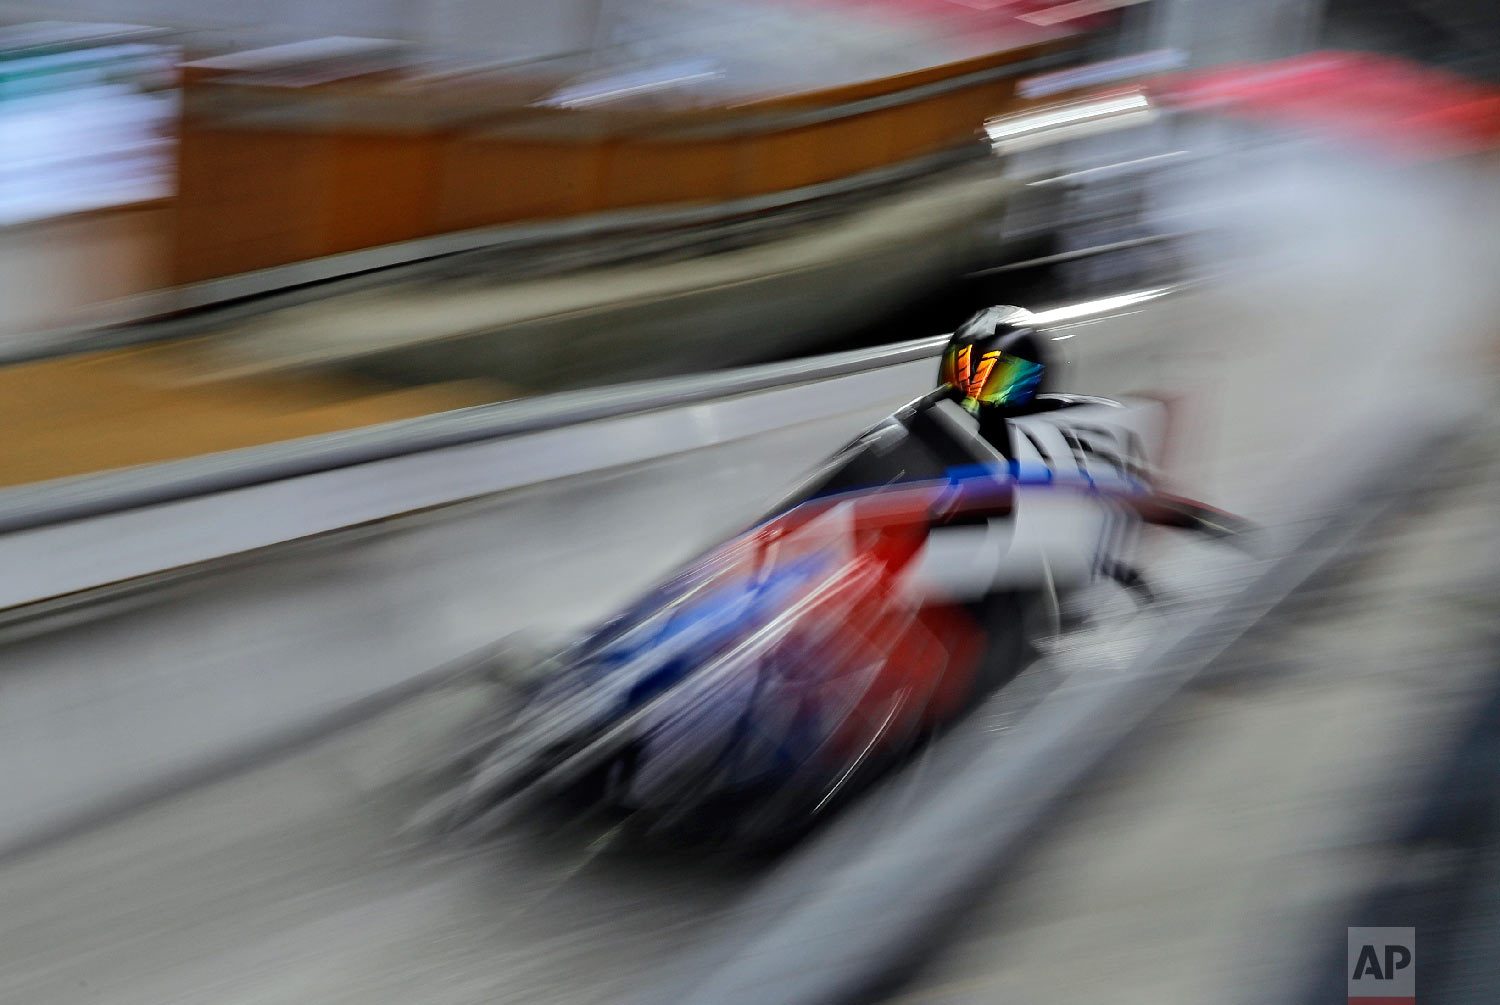  Driver Codie Bascue and Samuel McGuffie of the United States take a practice run during training for the two-man bobsled at the 2018 Winter Olympics in Pyeongchang, South Korea, Thursday, Feb. 15, 2018. (AP Photo/Wong Maye-E) 